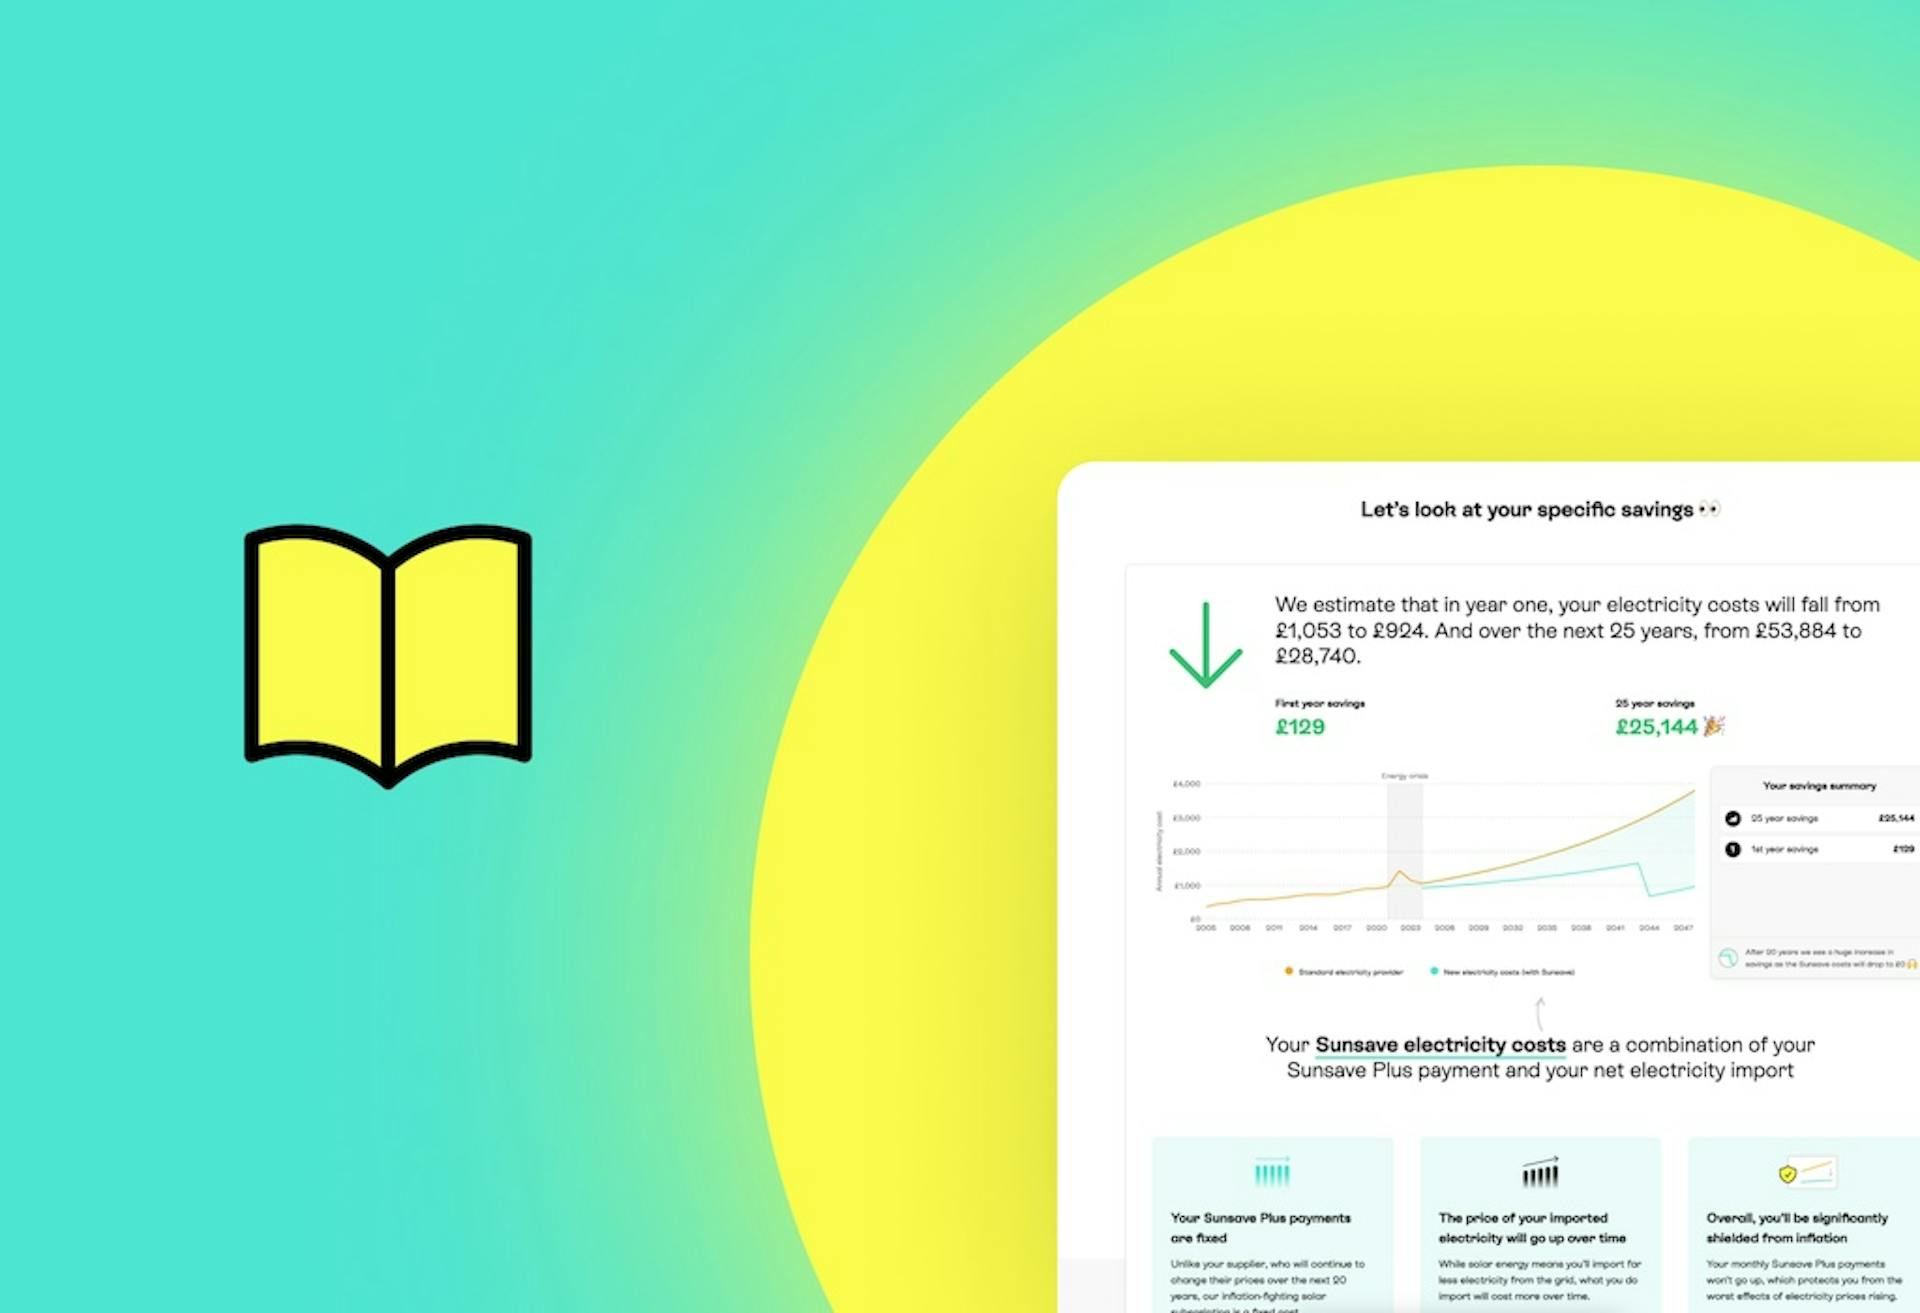 A screenshot of a Sunsave Plus proposal in the bottom right, surrounded by a yellow sun and a turquoise background. Cartoon yellow book to the left